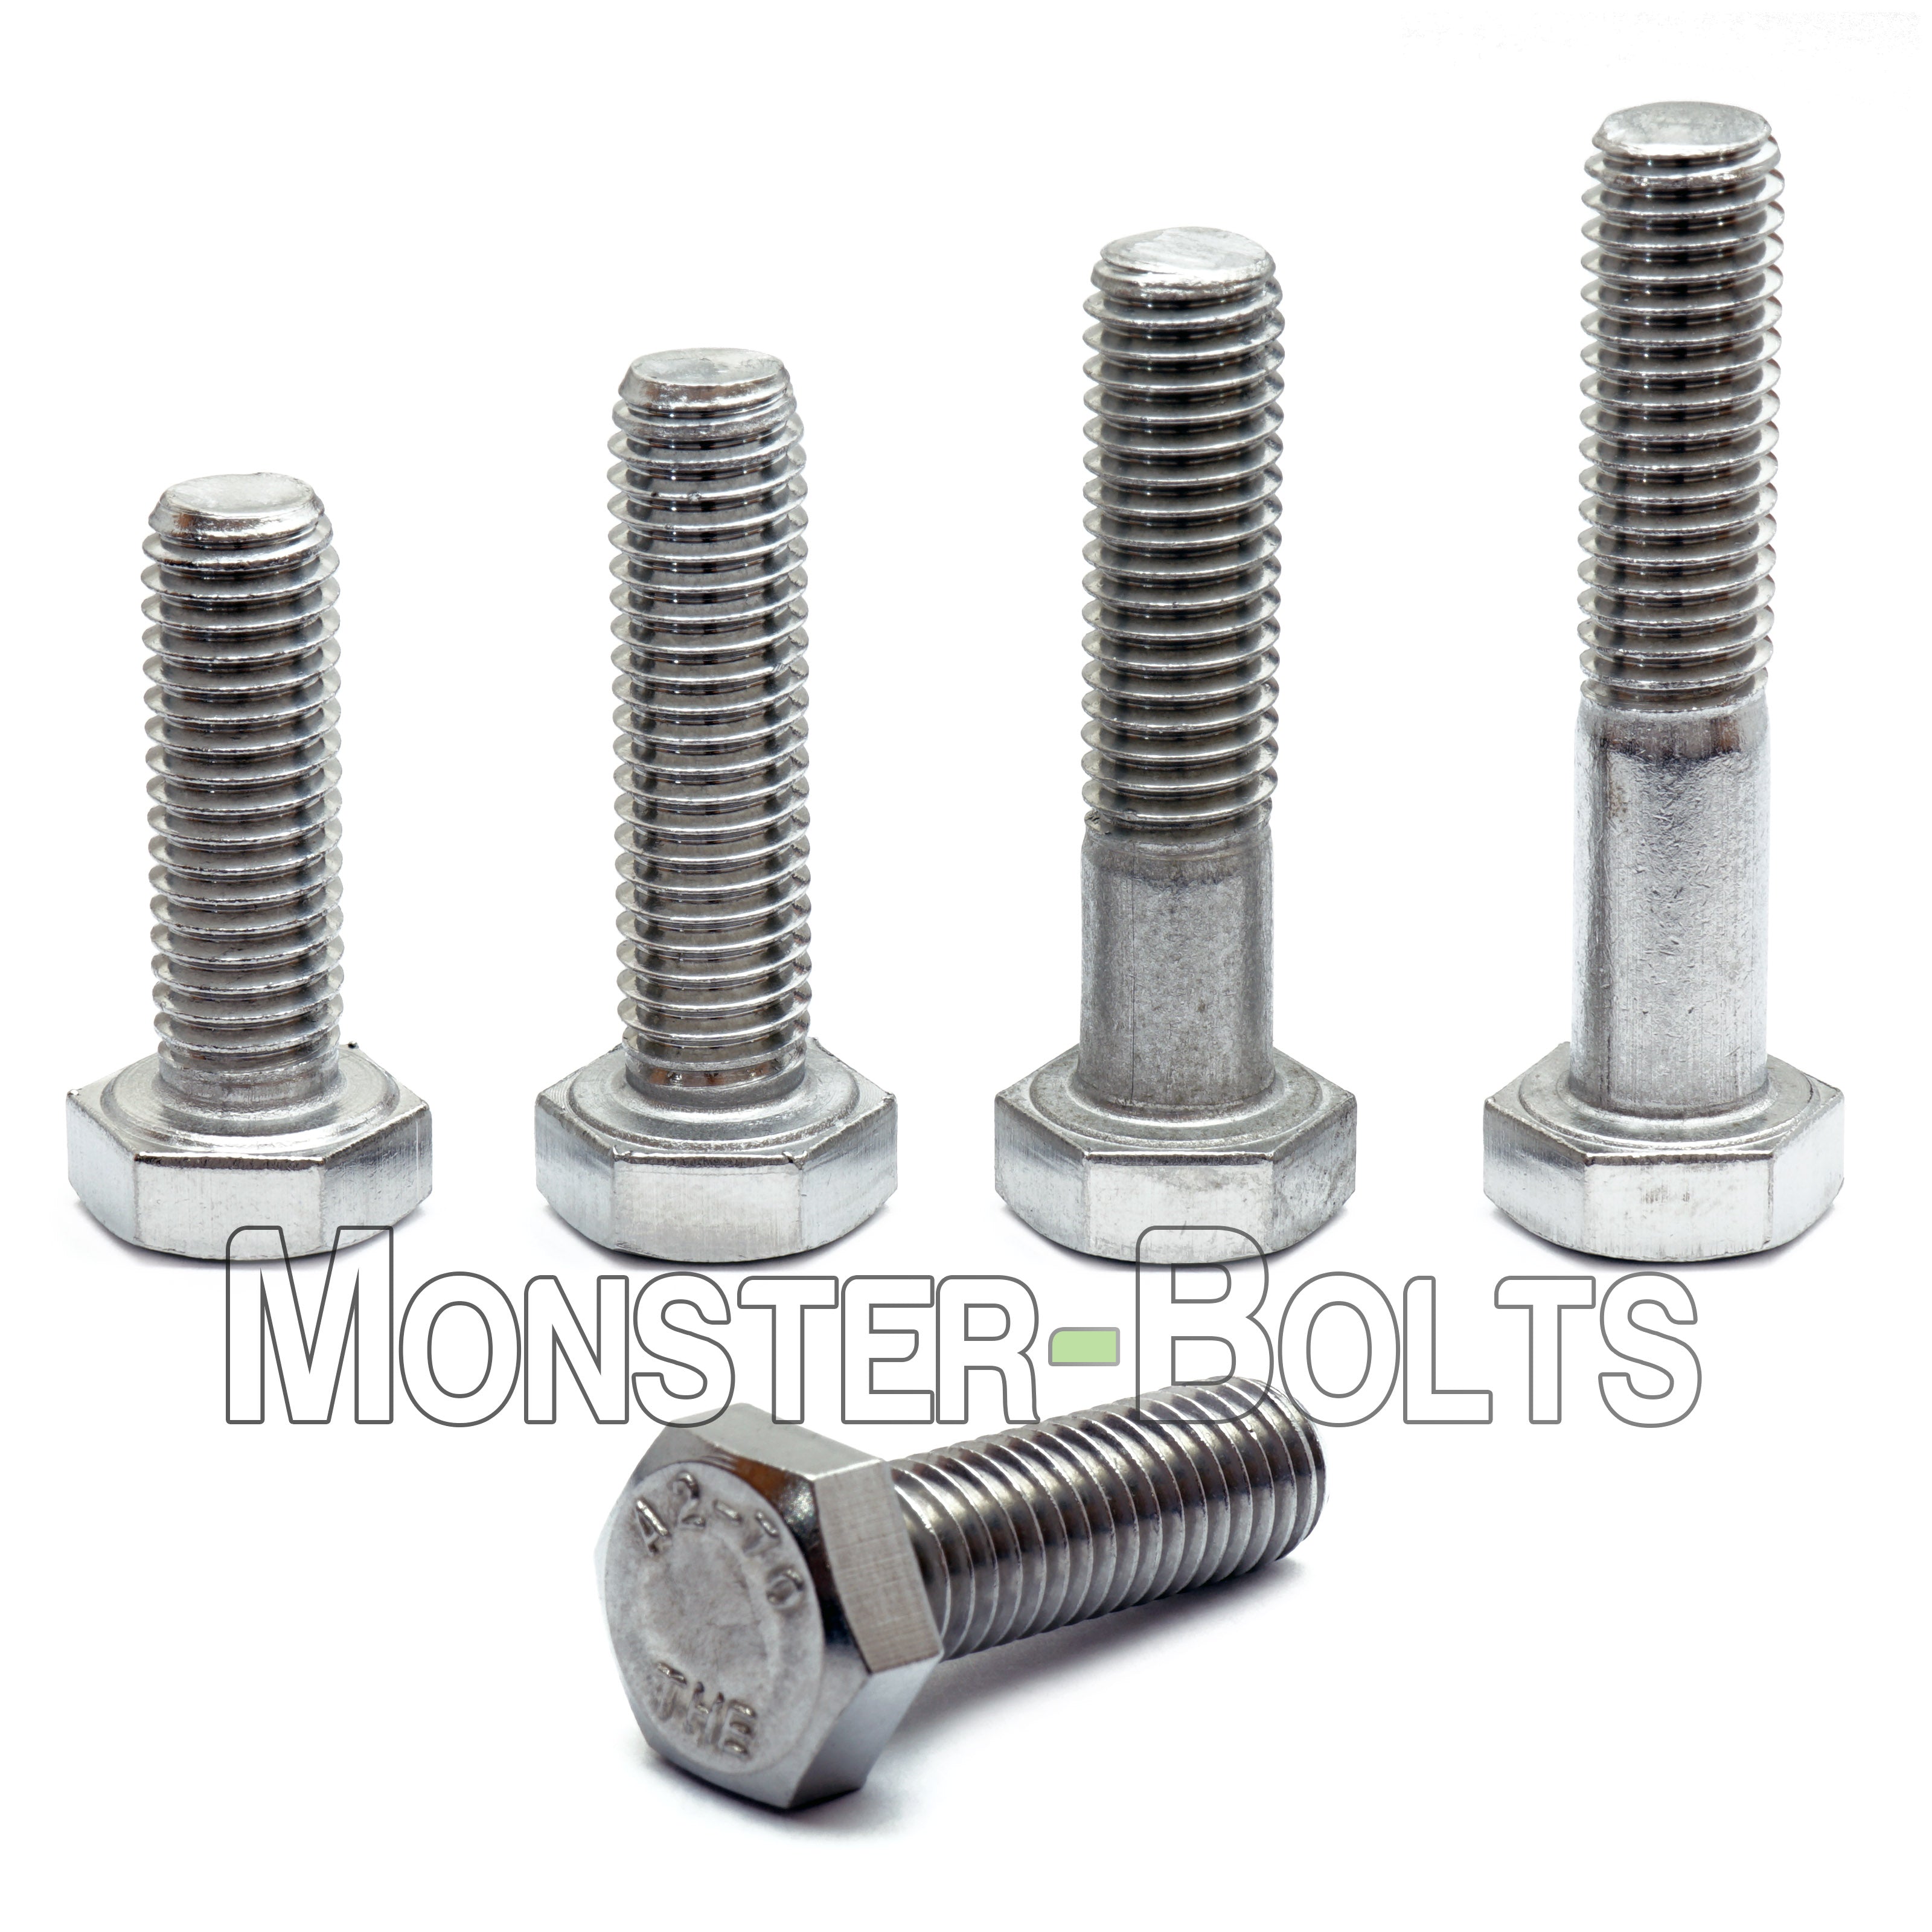 Details about   Genuine Peugeot Hex Head Flanged Screw Bolt M6x1.00x28mm PE706556 